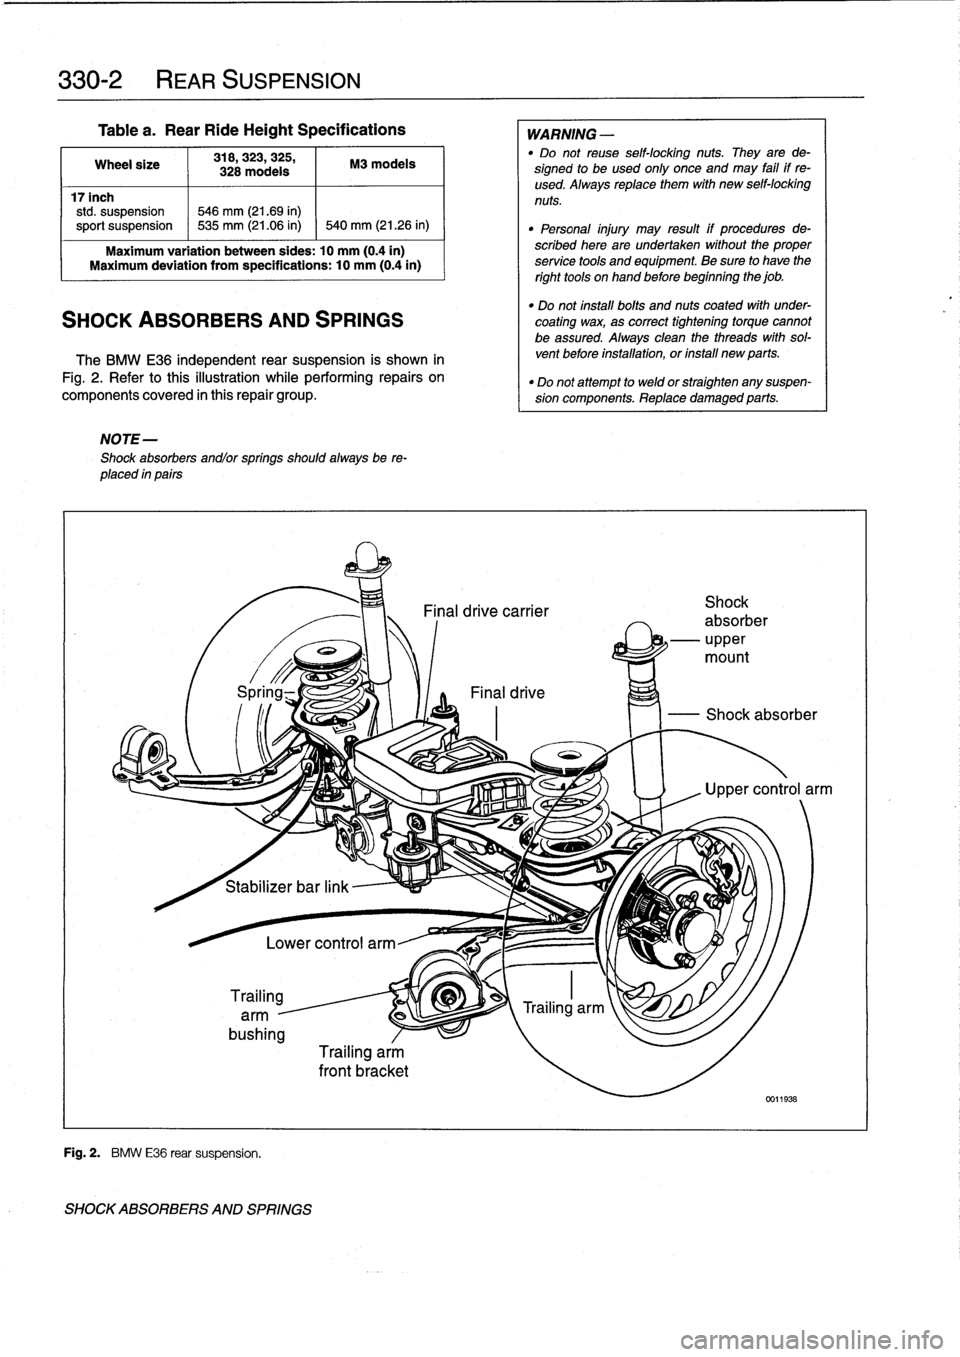 BMW 318i 1996 E36 Workshop Manual 
330-2

	

REAR
SUSPENSION

Table
a
.
Rear
RideHeight
Specifications

Wheel
size

	

318,323,
325,

	

M3
modeis
328
modeis

17inch
std
.
suspension

	

546
mm
(21.69
in)
sport
suspension

	

~
535
mm